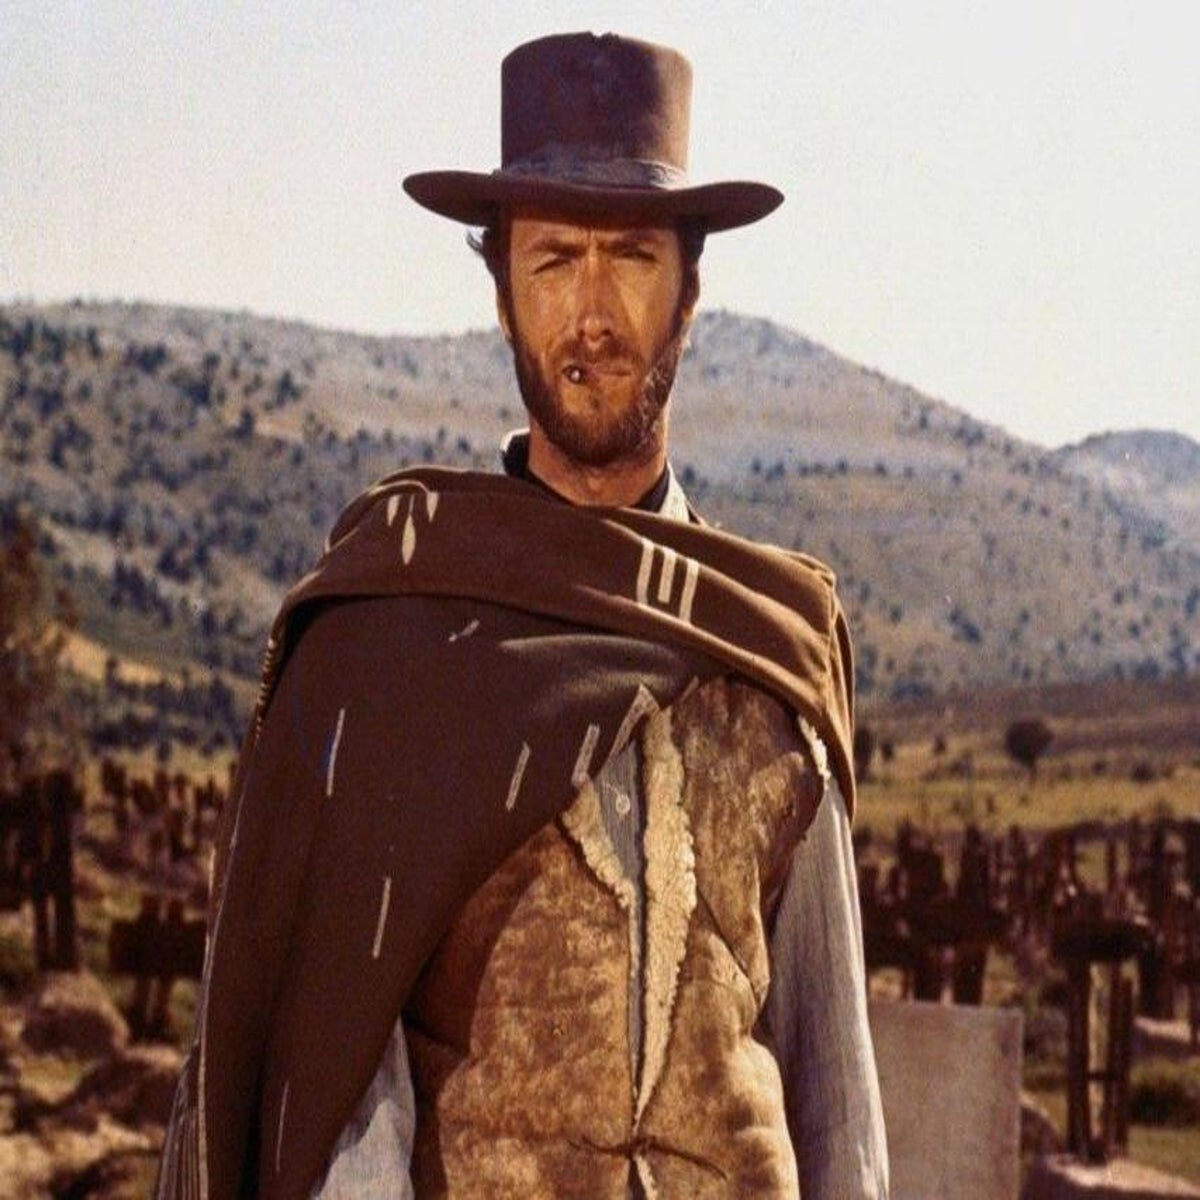 The 20 greatest western movies of all time | The Independent